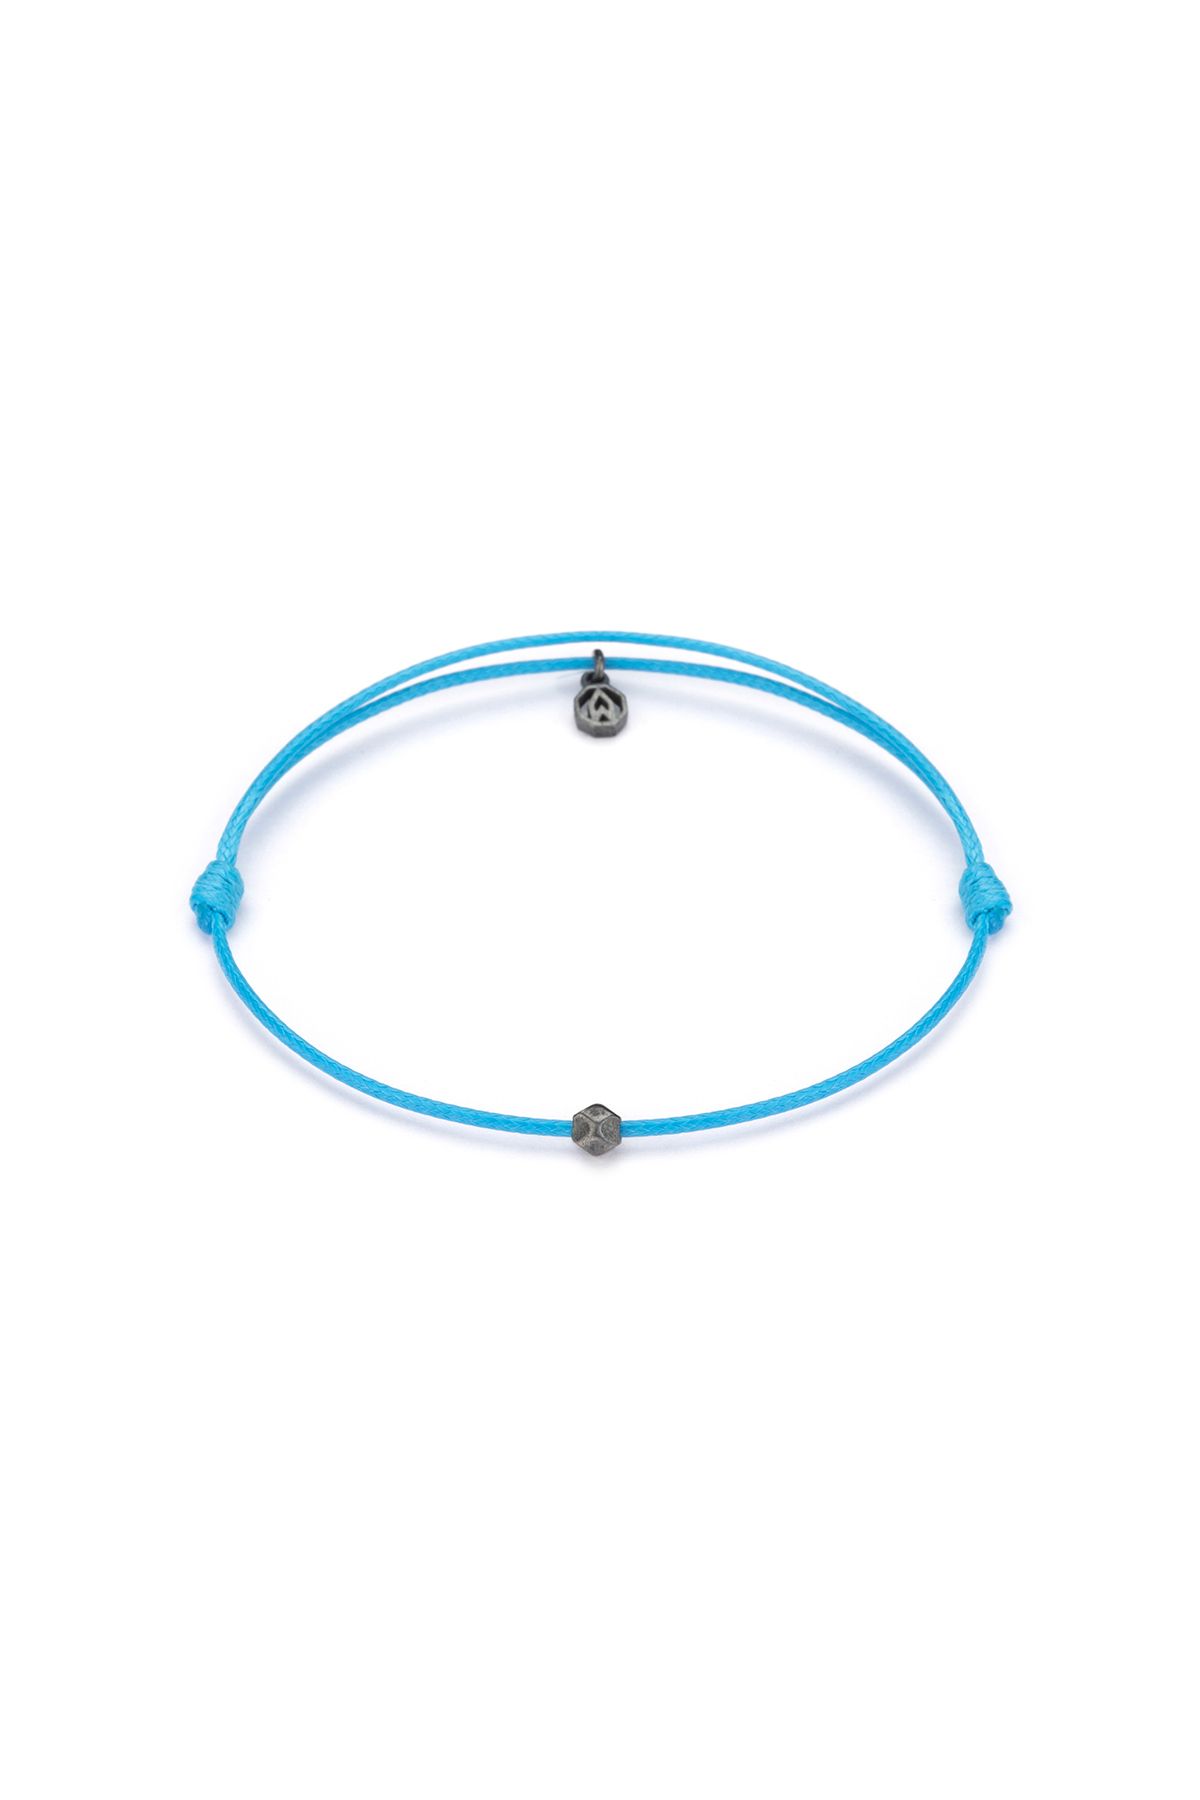 Atolyewolf Blue Chance Bracelet in Oxide